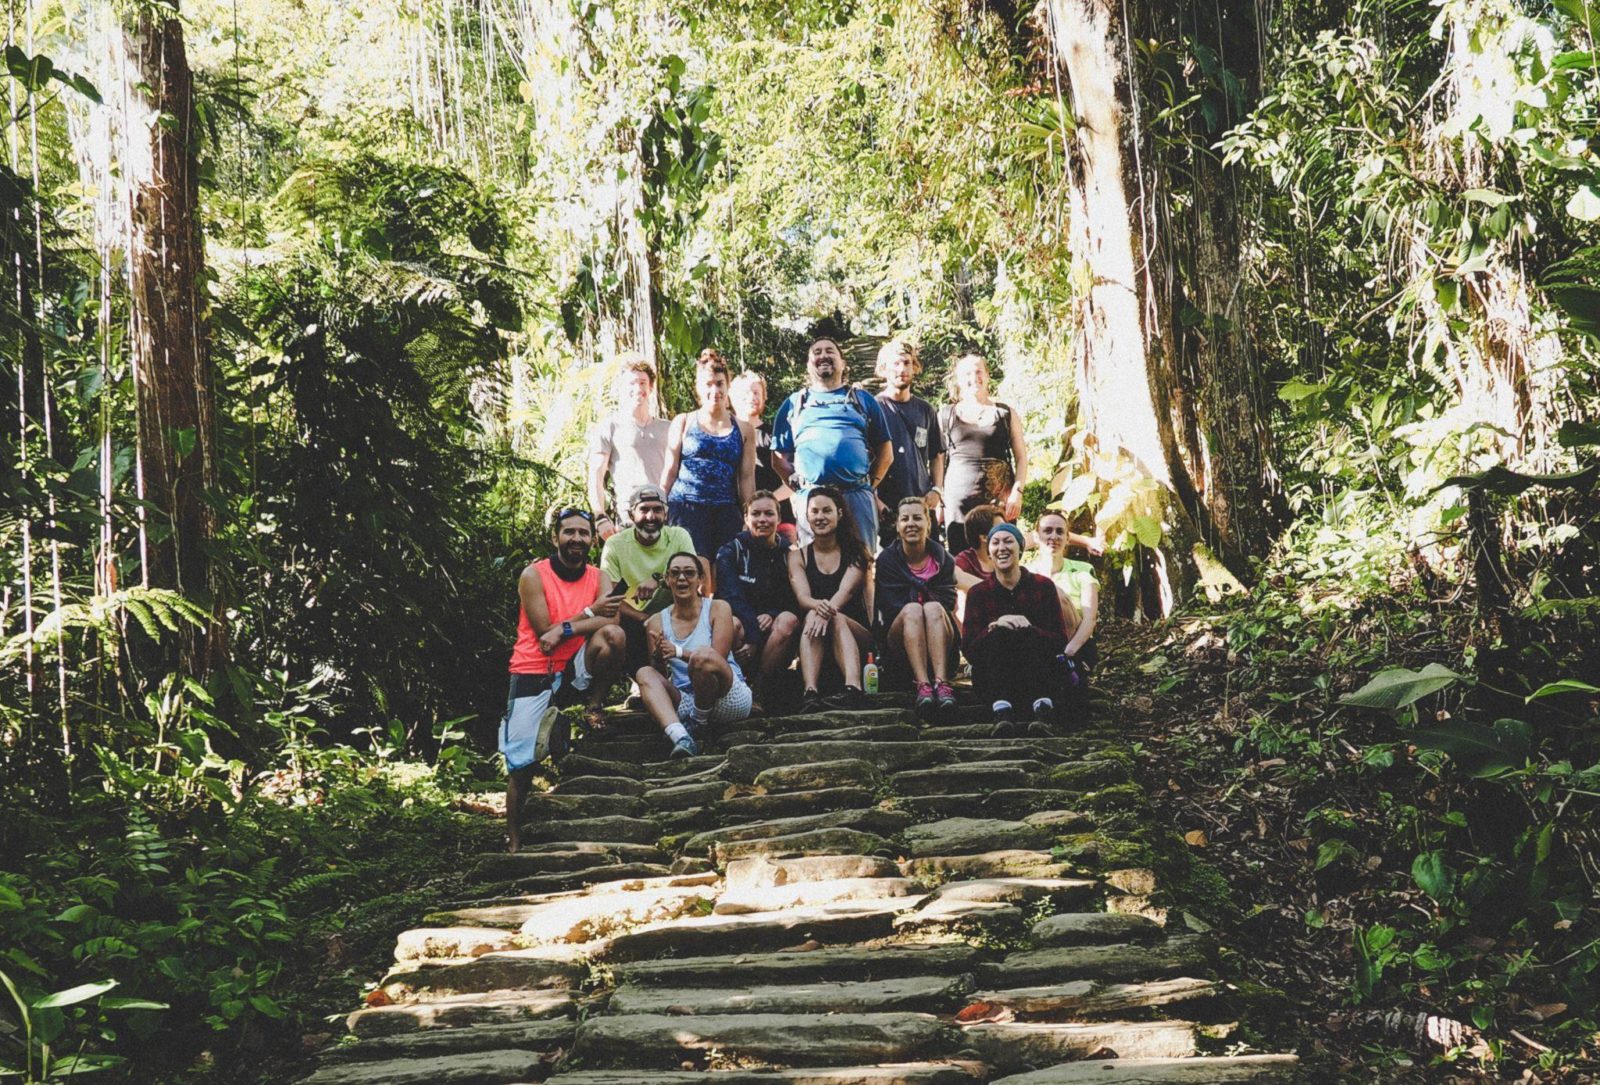 Colombian Guides | The Complete Guide to The Lost City Trek